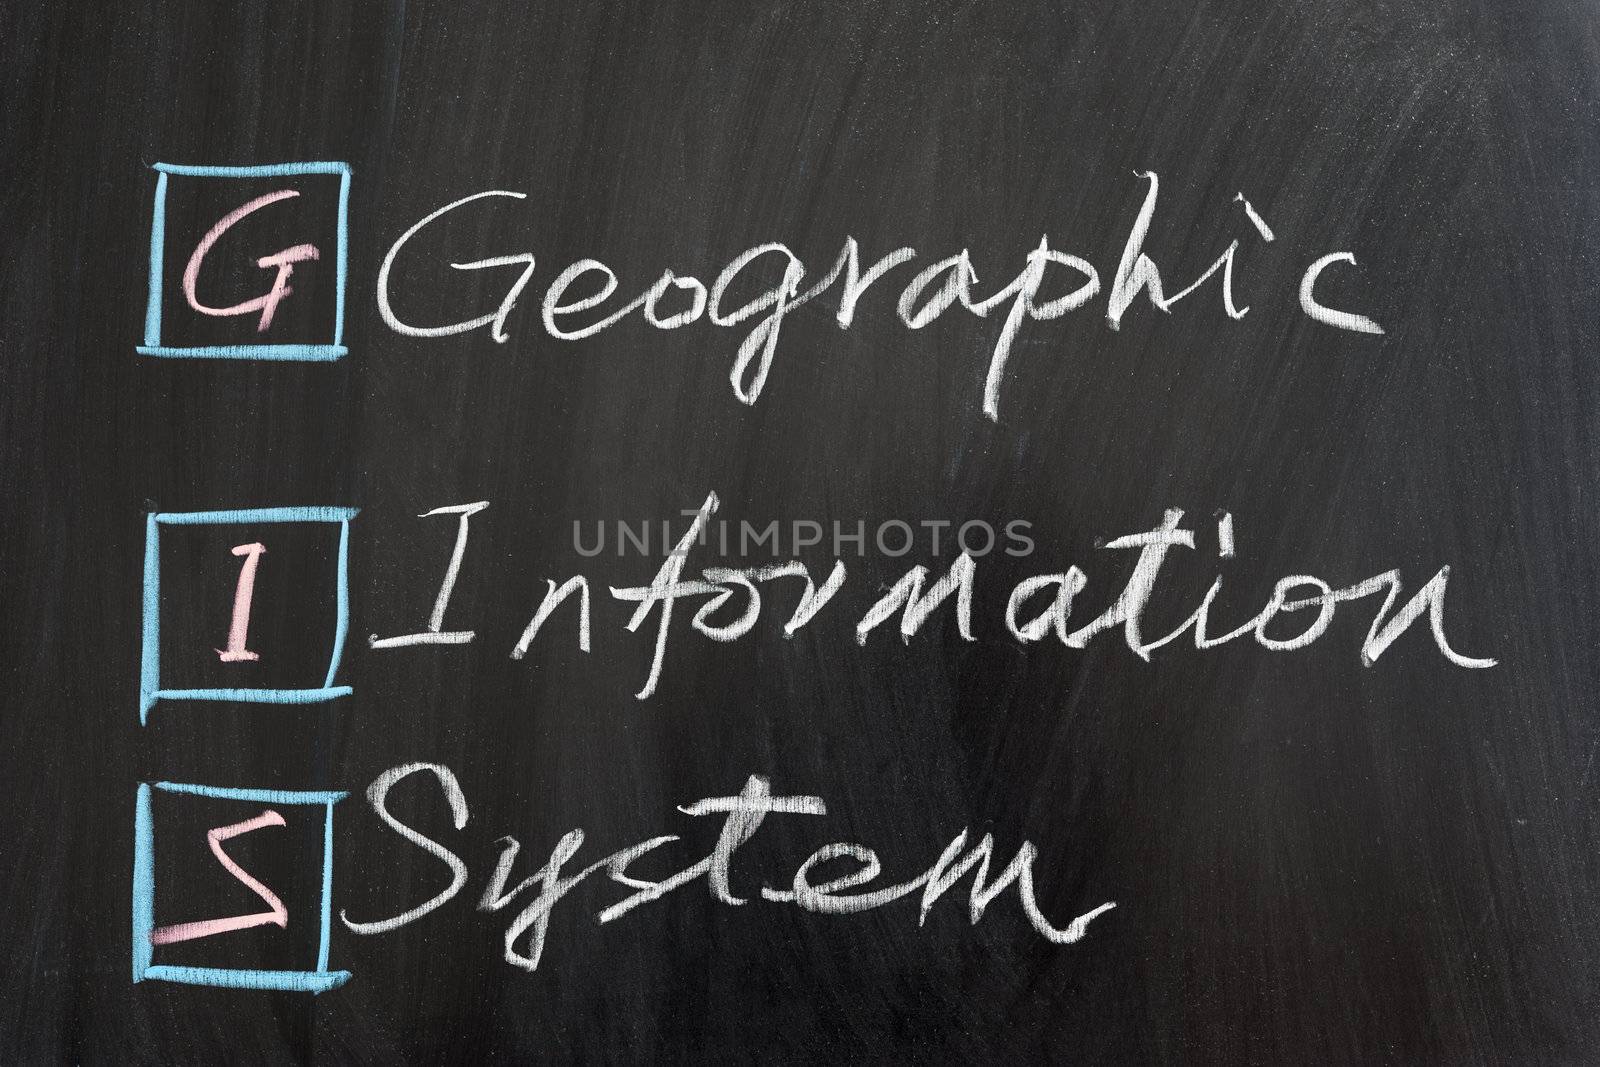 GIS, Geographic Information System, written on the chalkboard